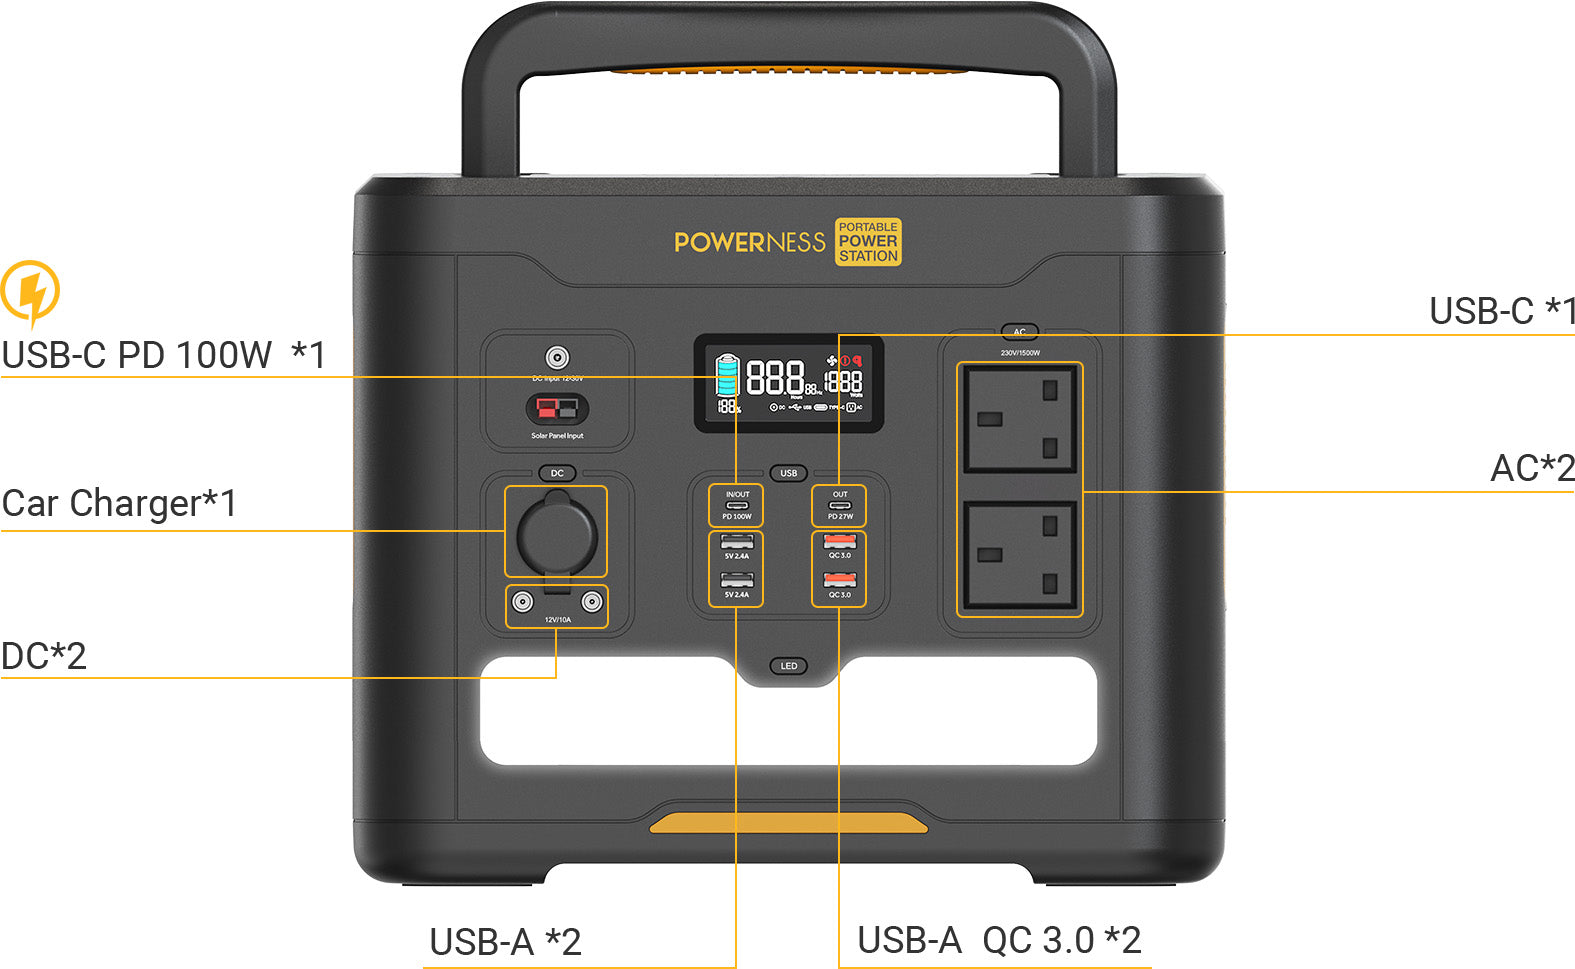 Powerness Hiker U1500 Portable Power Station. Front view highlighting various device ports for versatile charging options